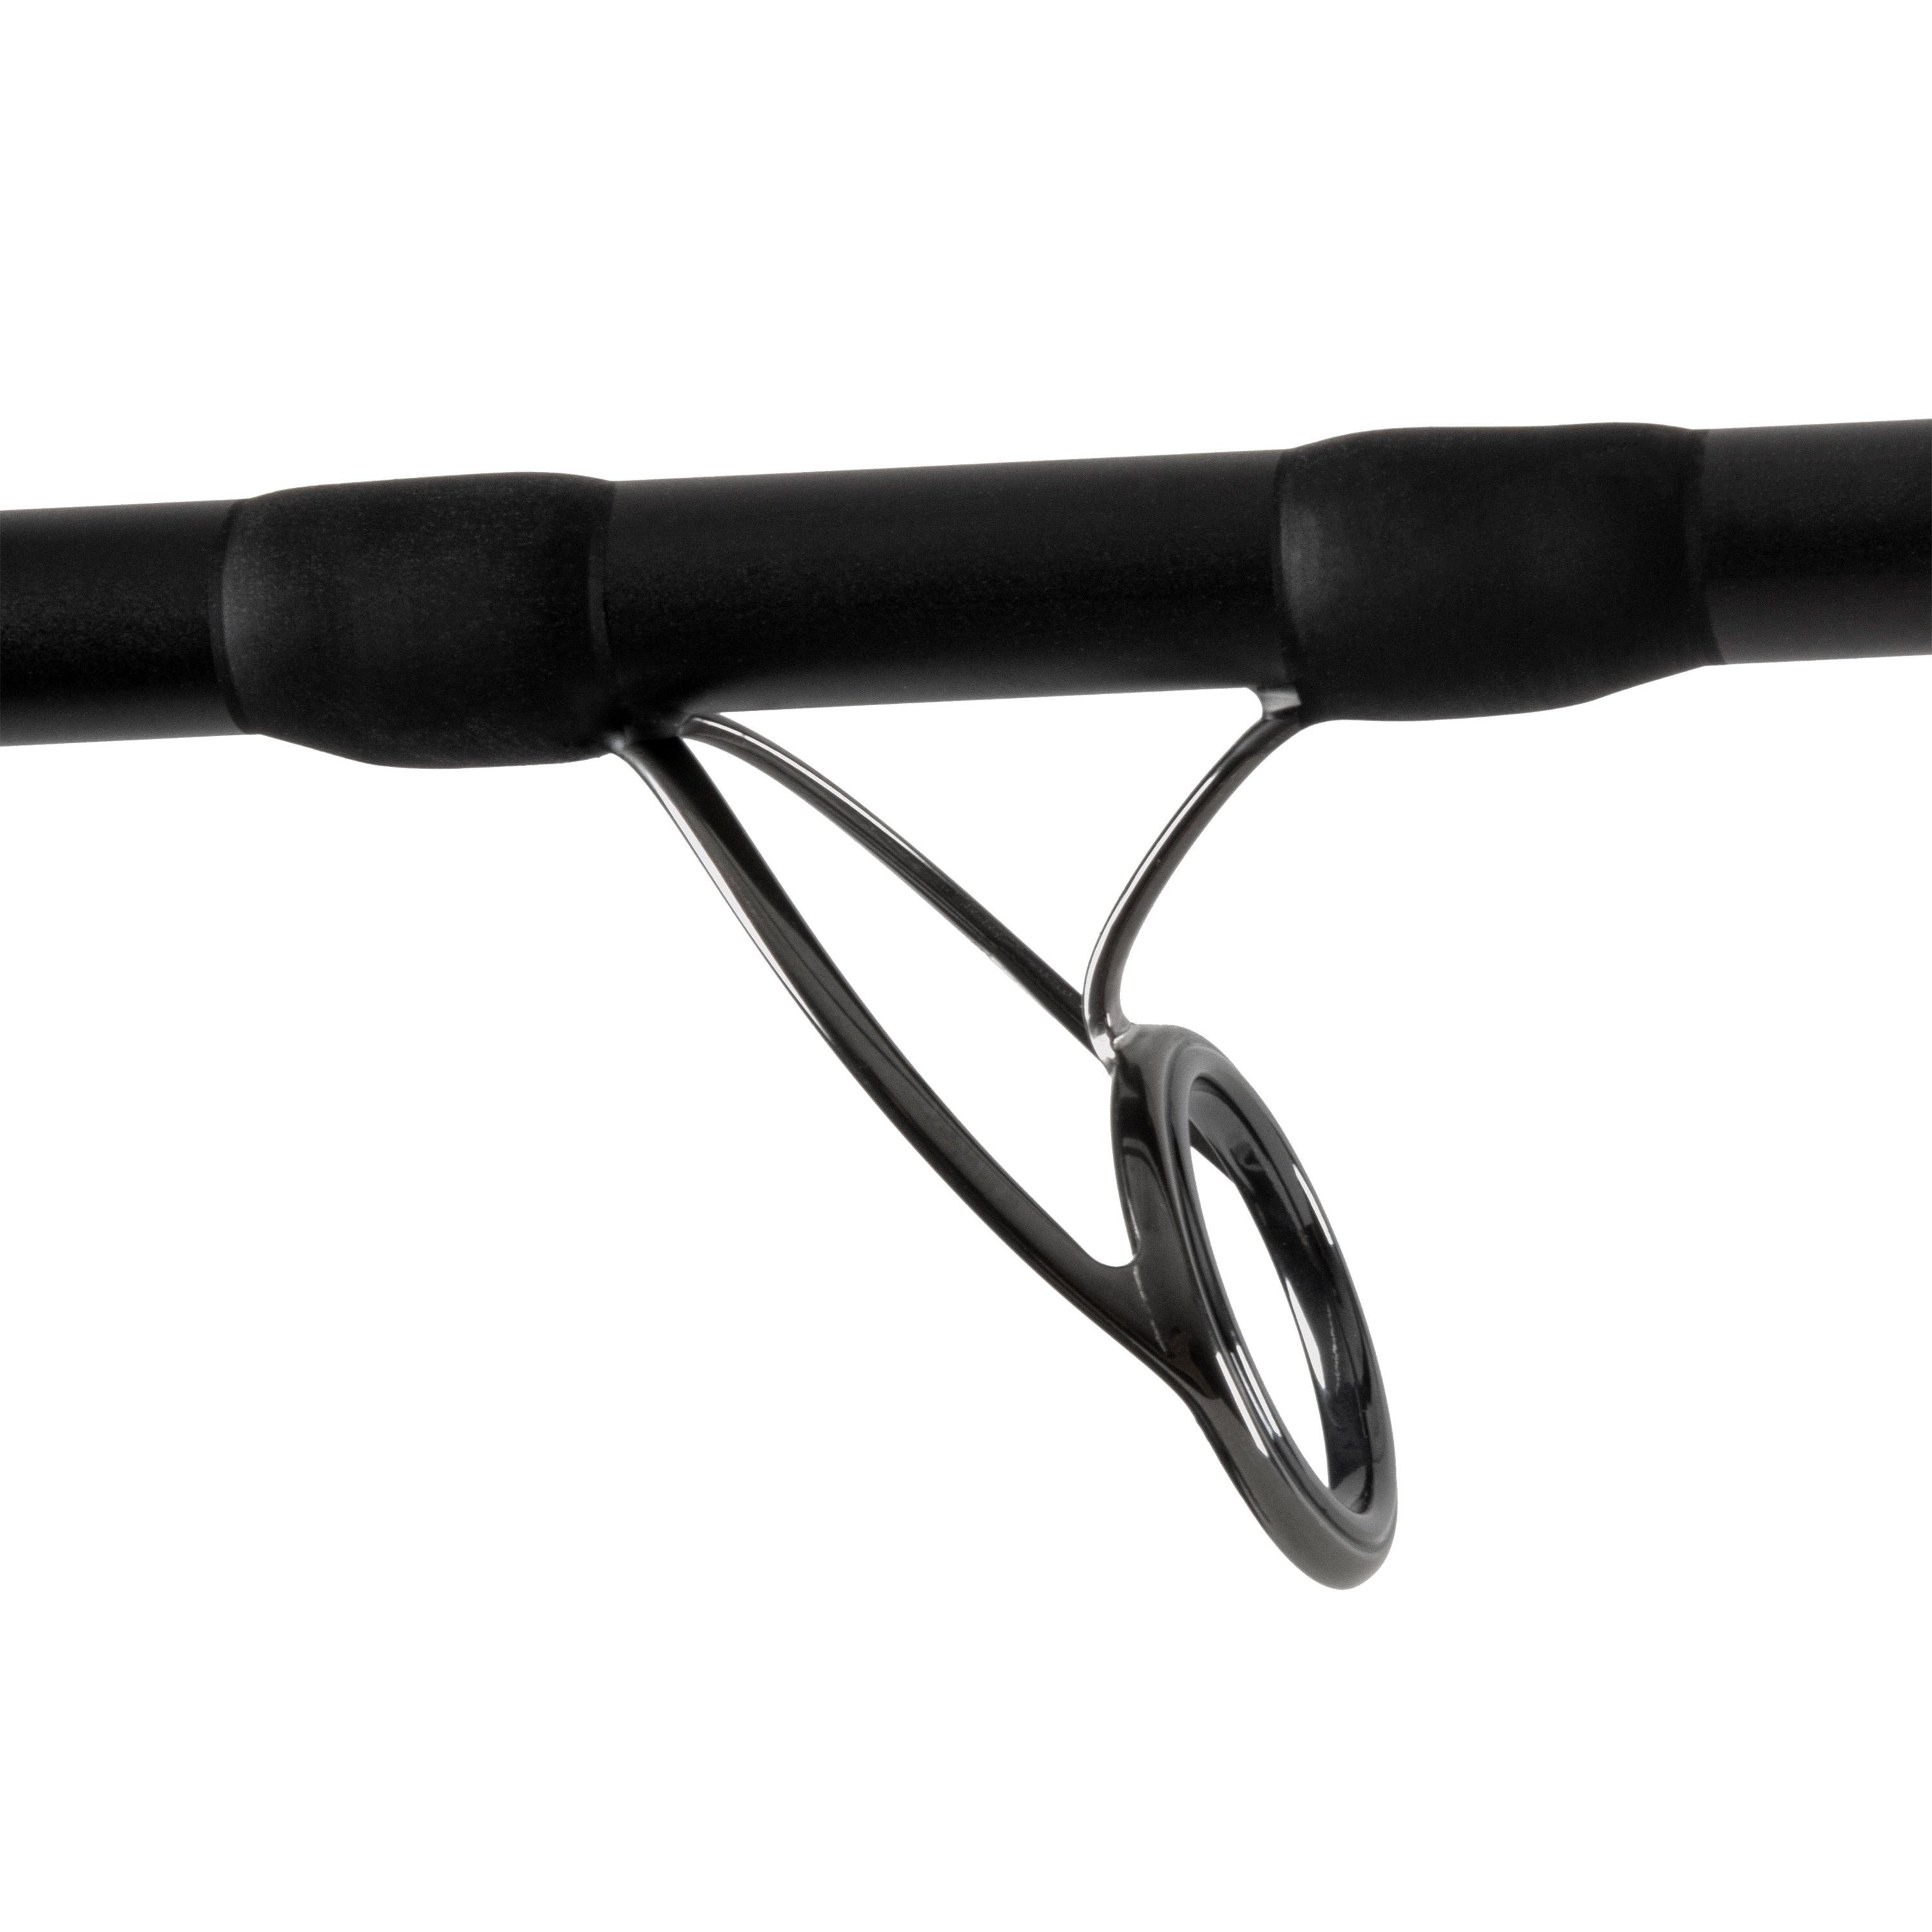 Forged Surf Spinning Rod